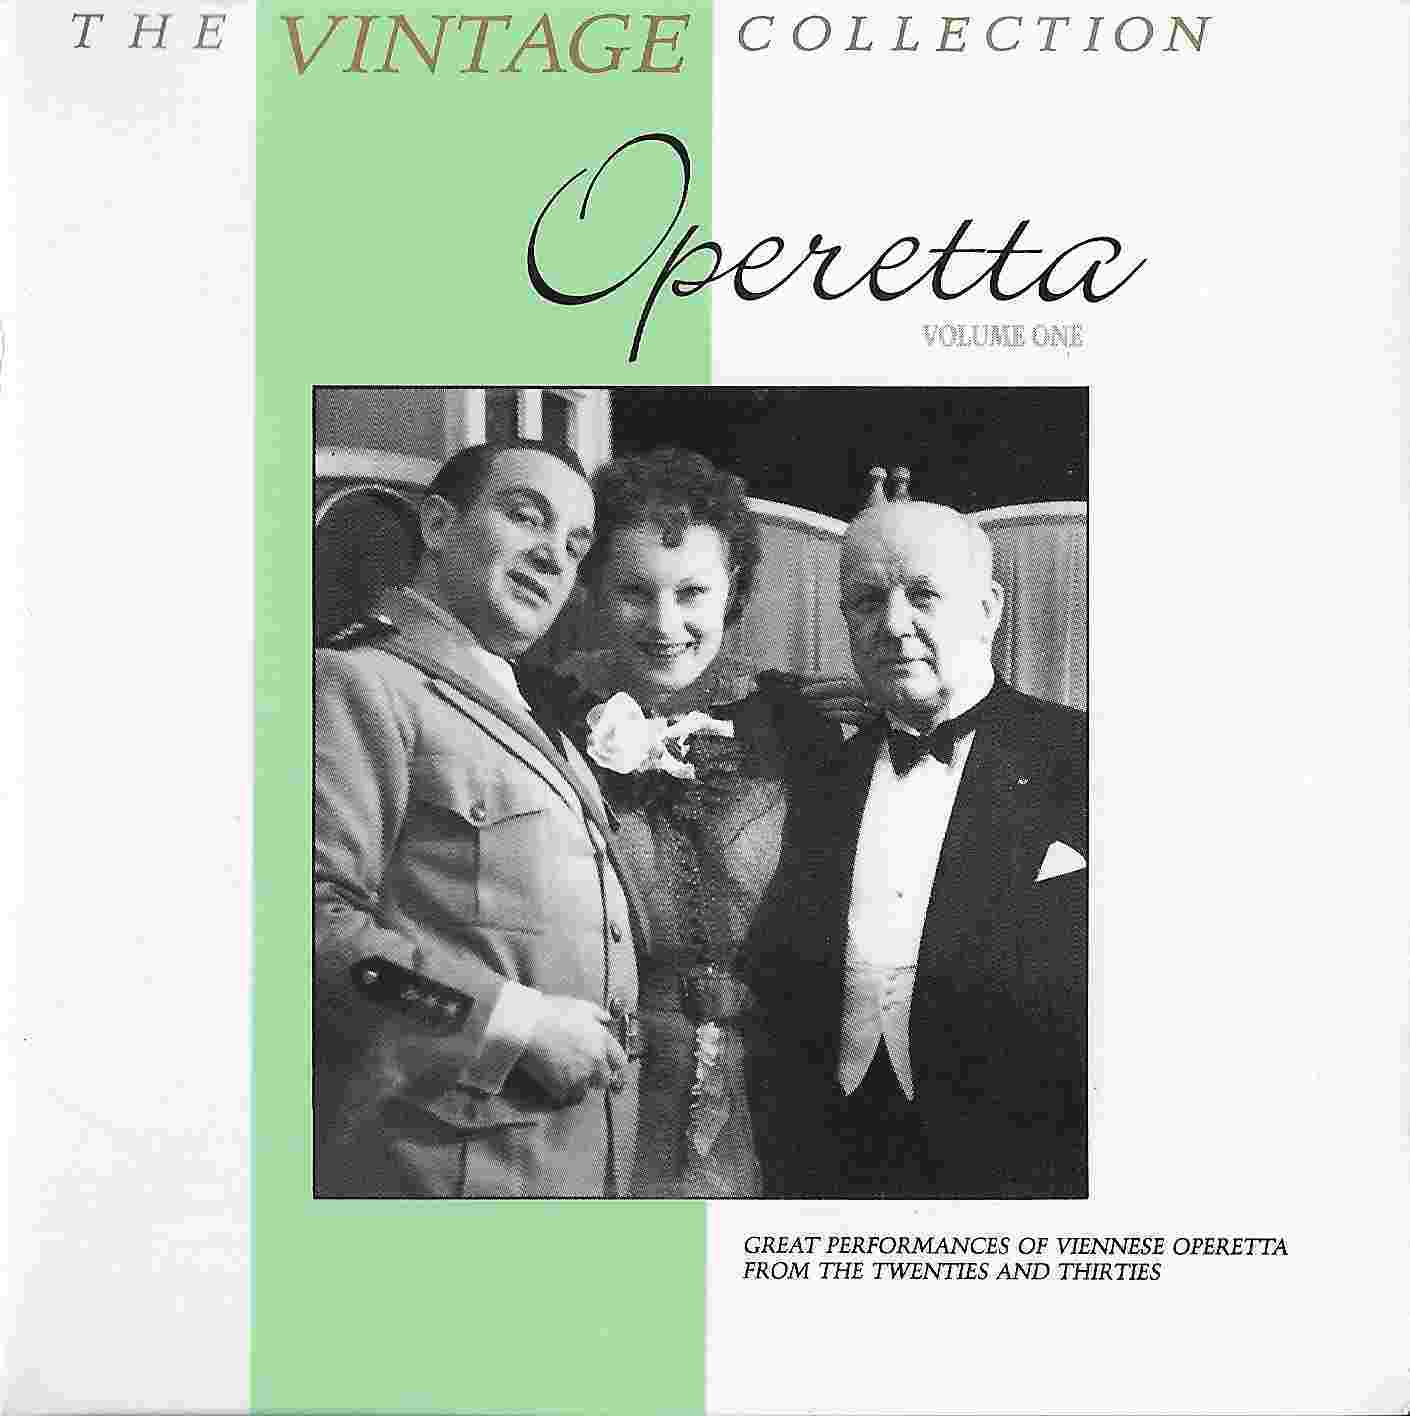 Picture of BBCCD716 The vintage collection - Operetta by artist Various from the BBC cds - Records and Tapes library